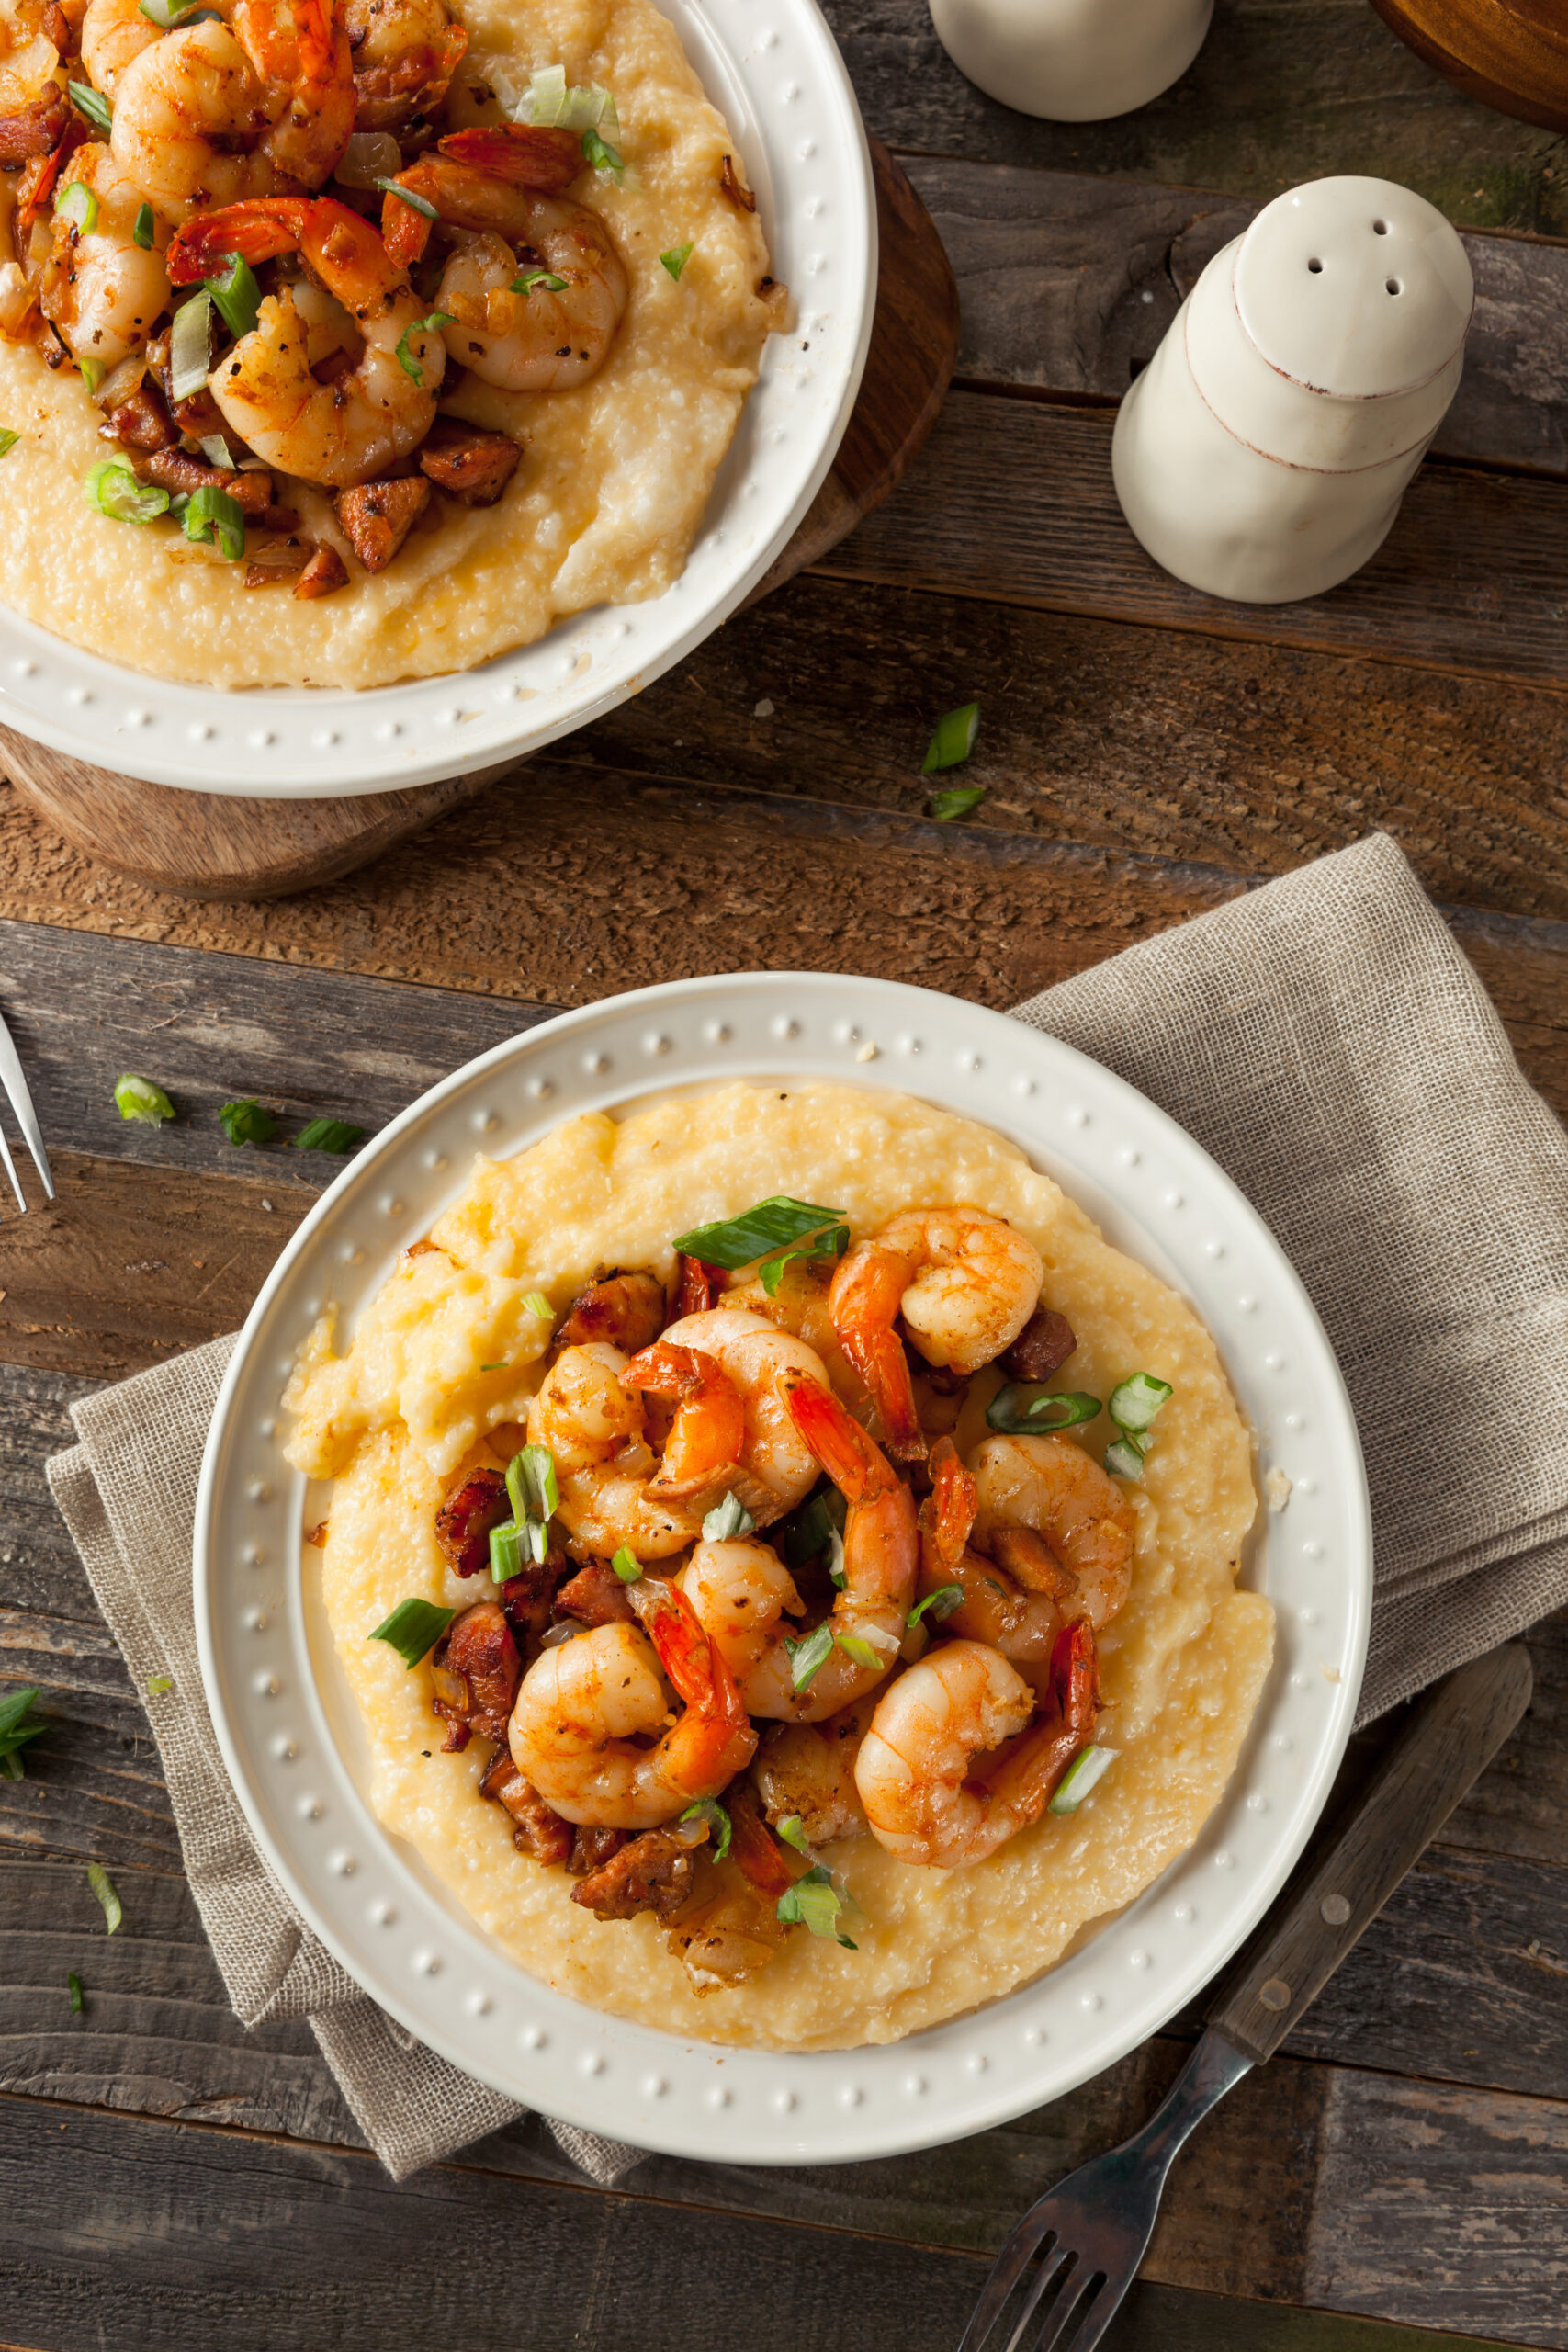 Homemade Shrimp and Grits with Pork and Cheddar in Savannah Georgia